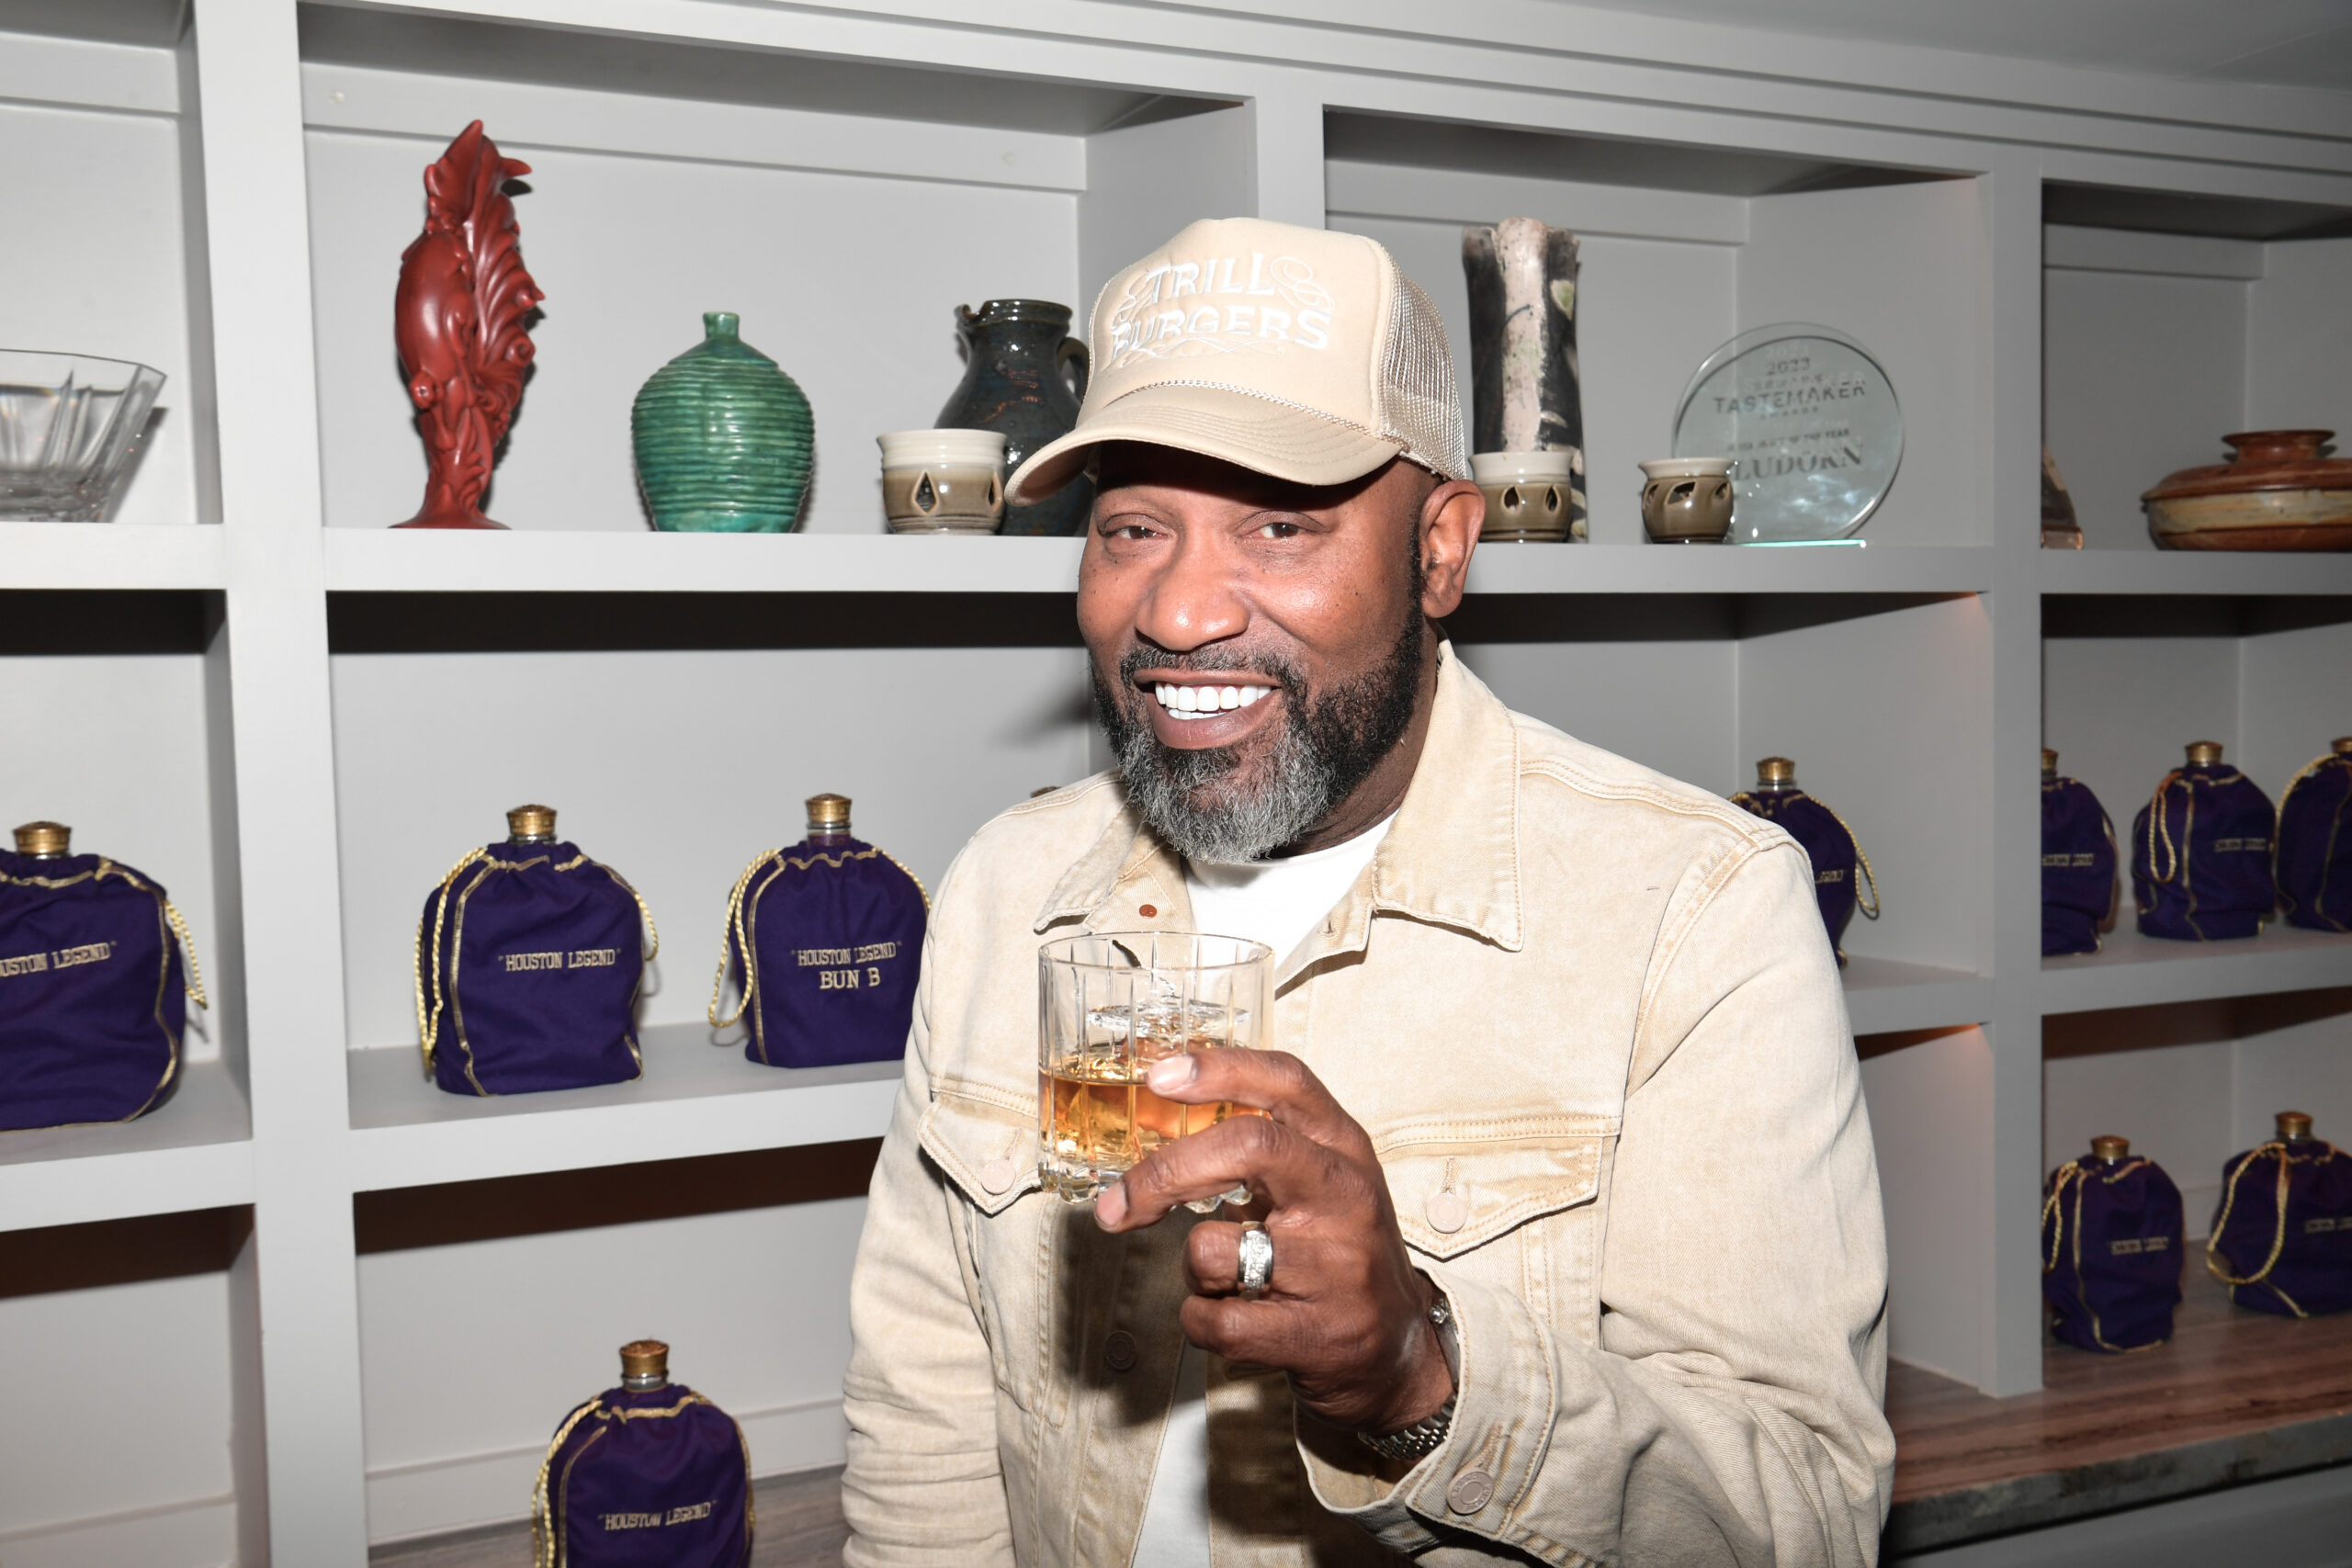 Bun B On The Houston Rodeo And Giving Back: 'The Single Most Houston Thing We Do Every Year'